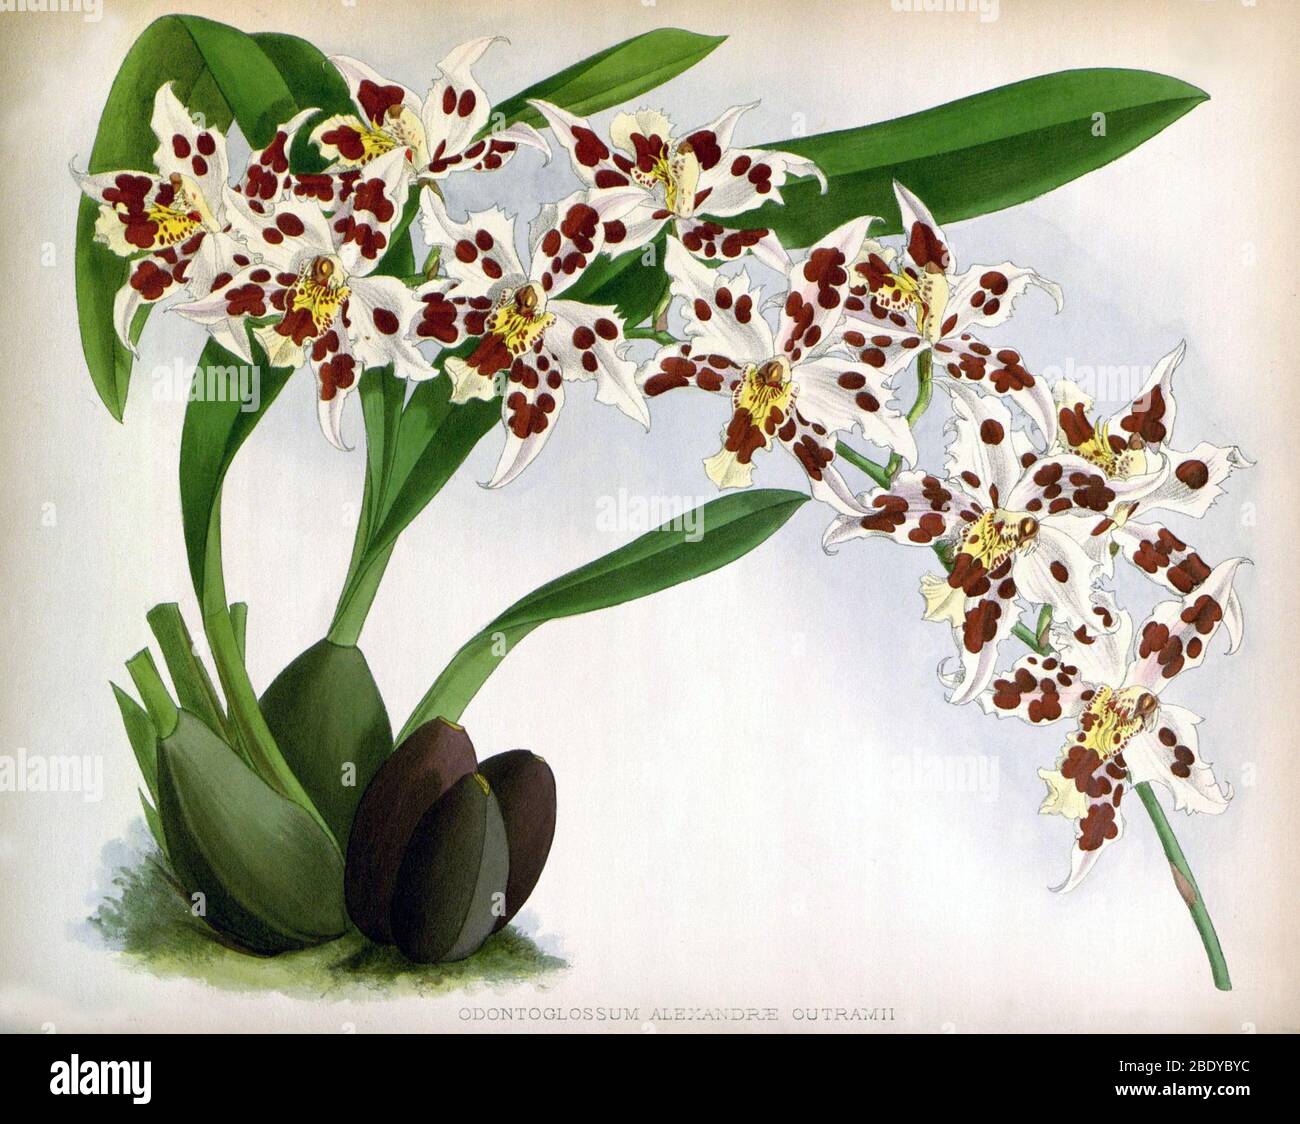 Orchid, O. alexandre outramii, 1891 Stock Photo